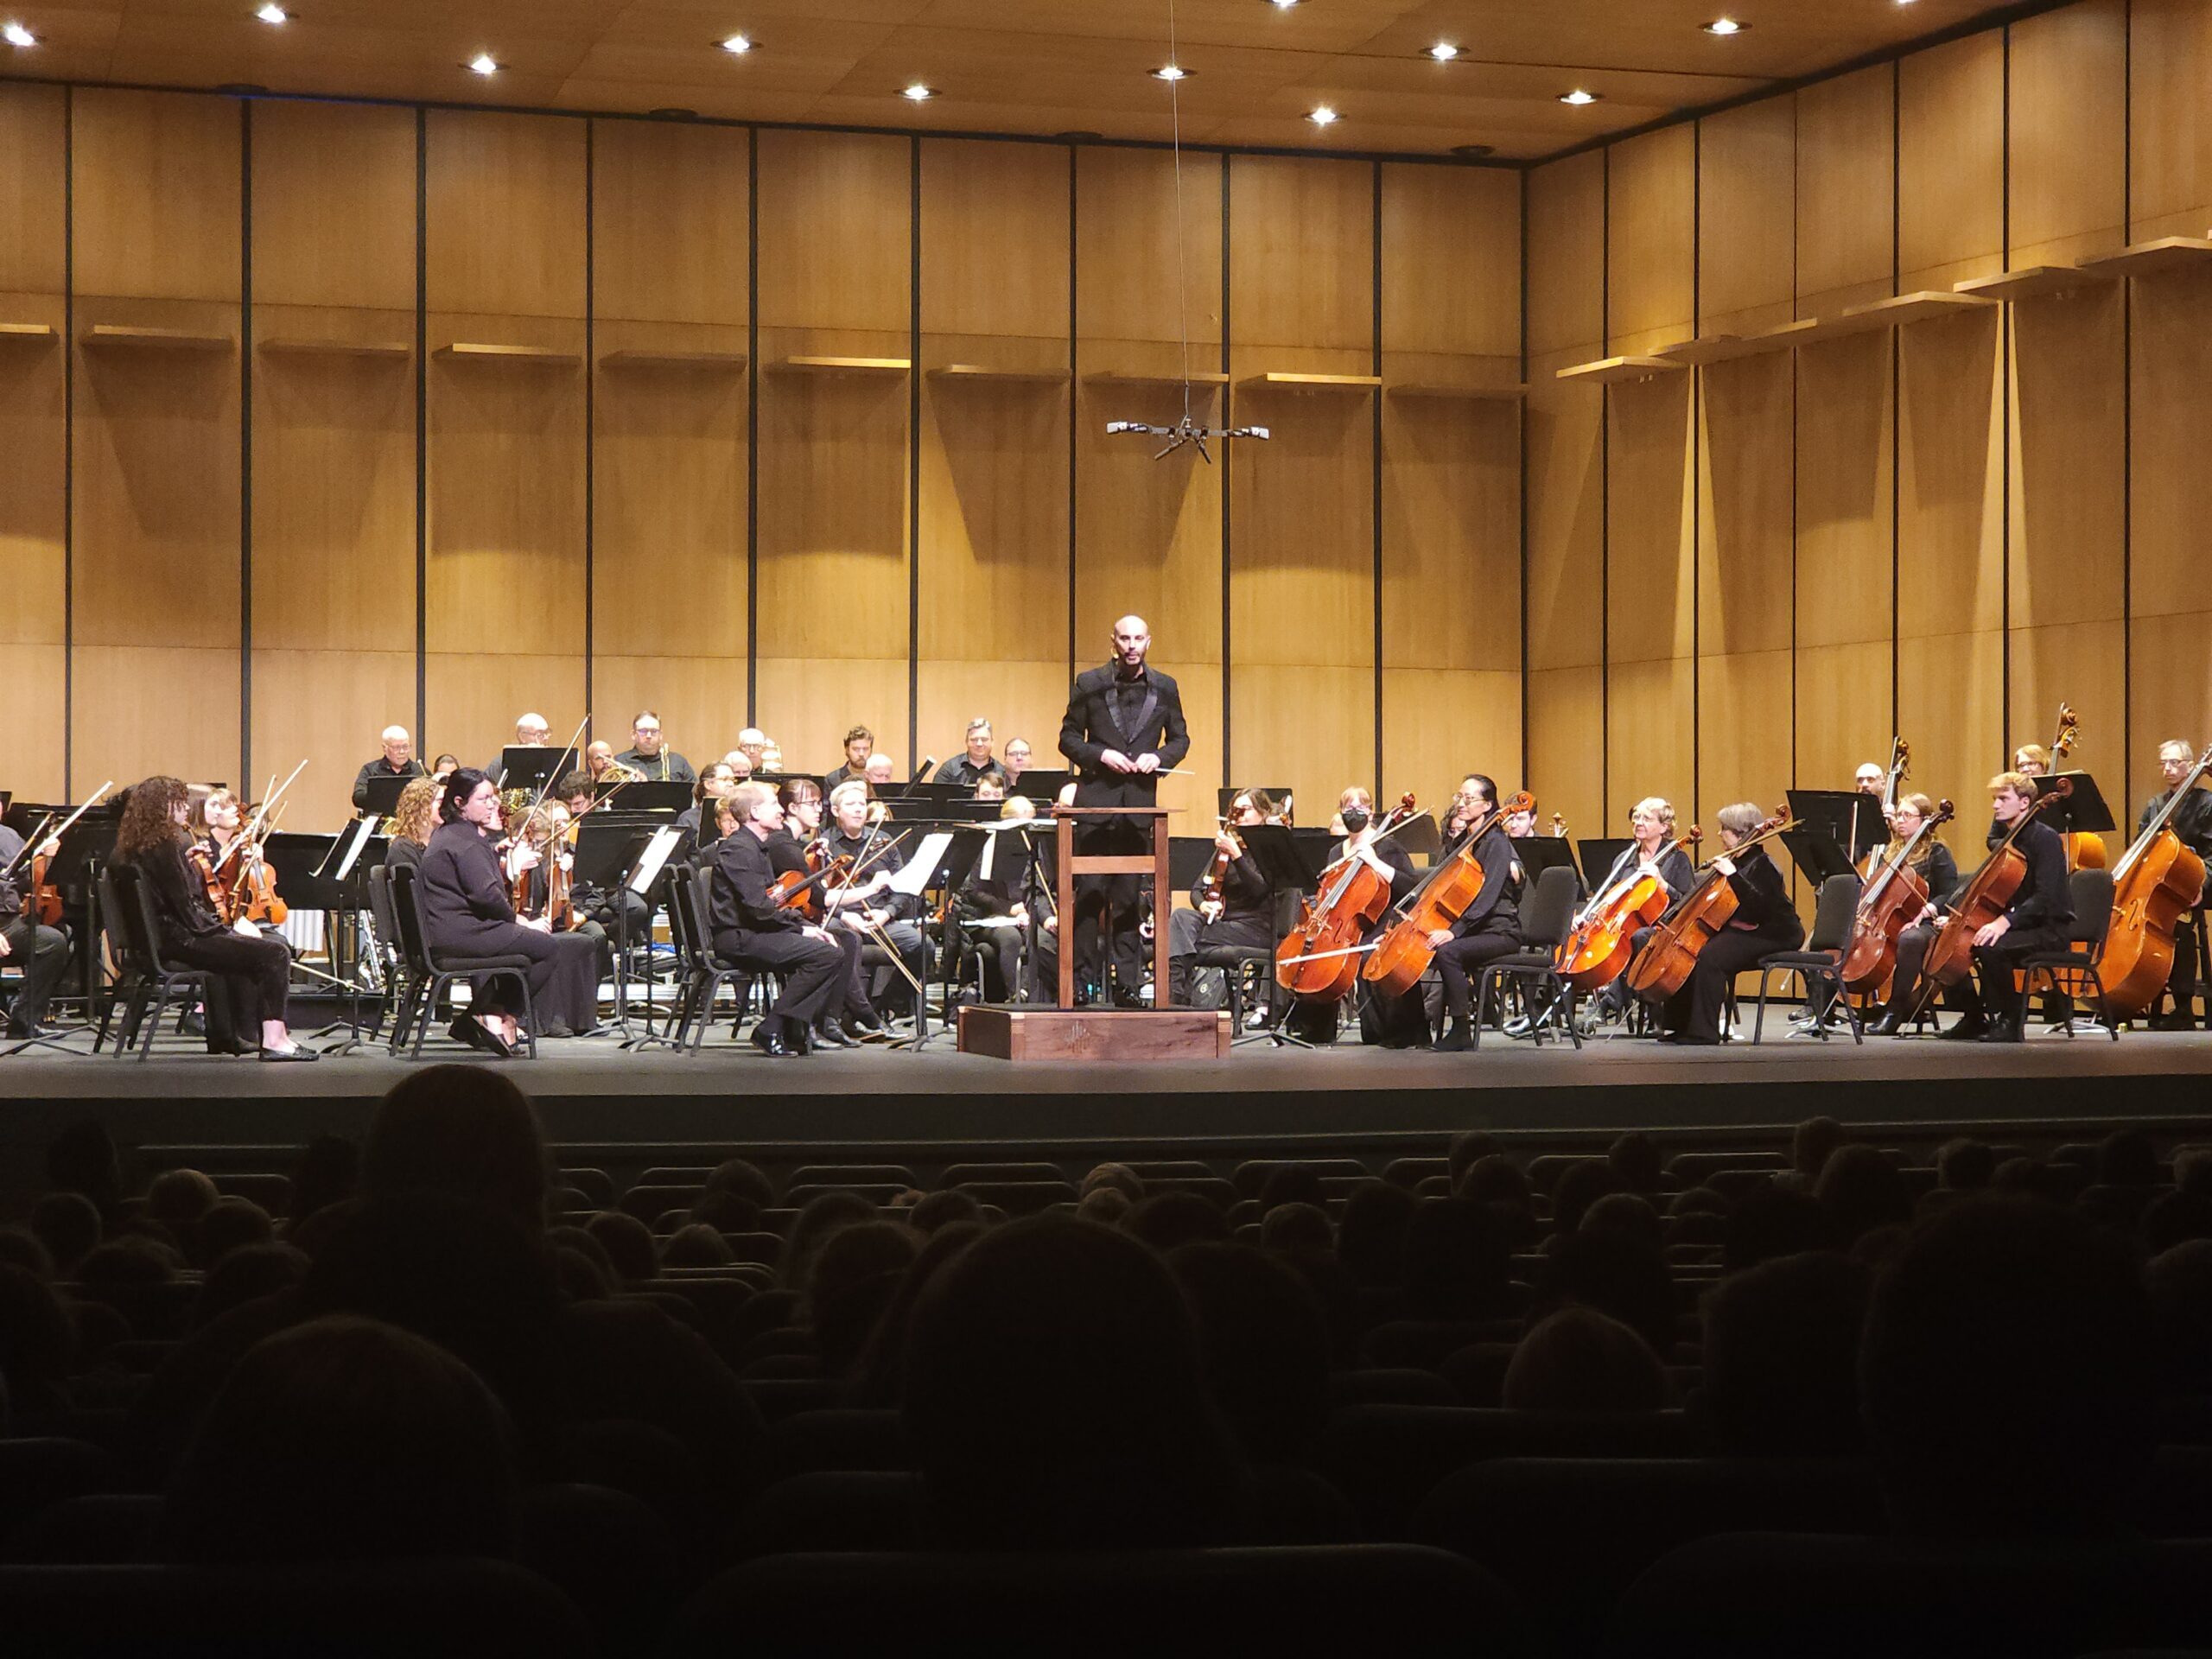 orchestra in a large auditorium